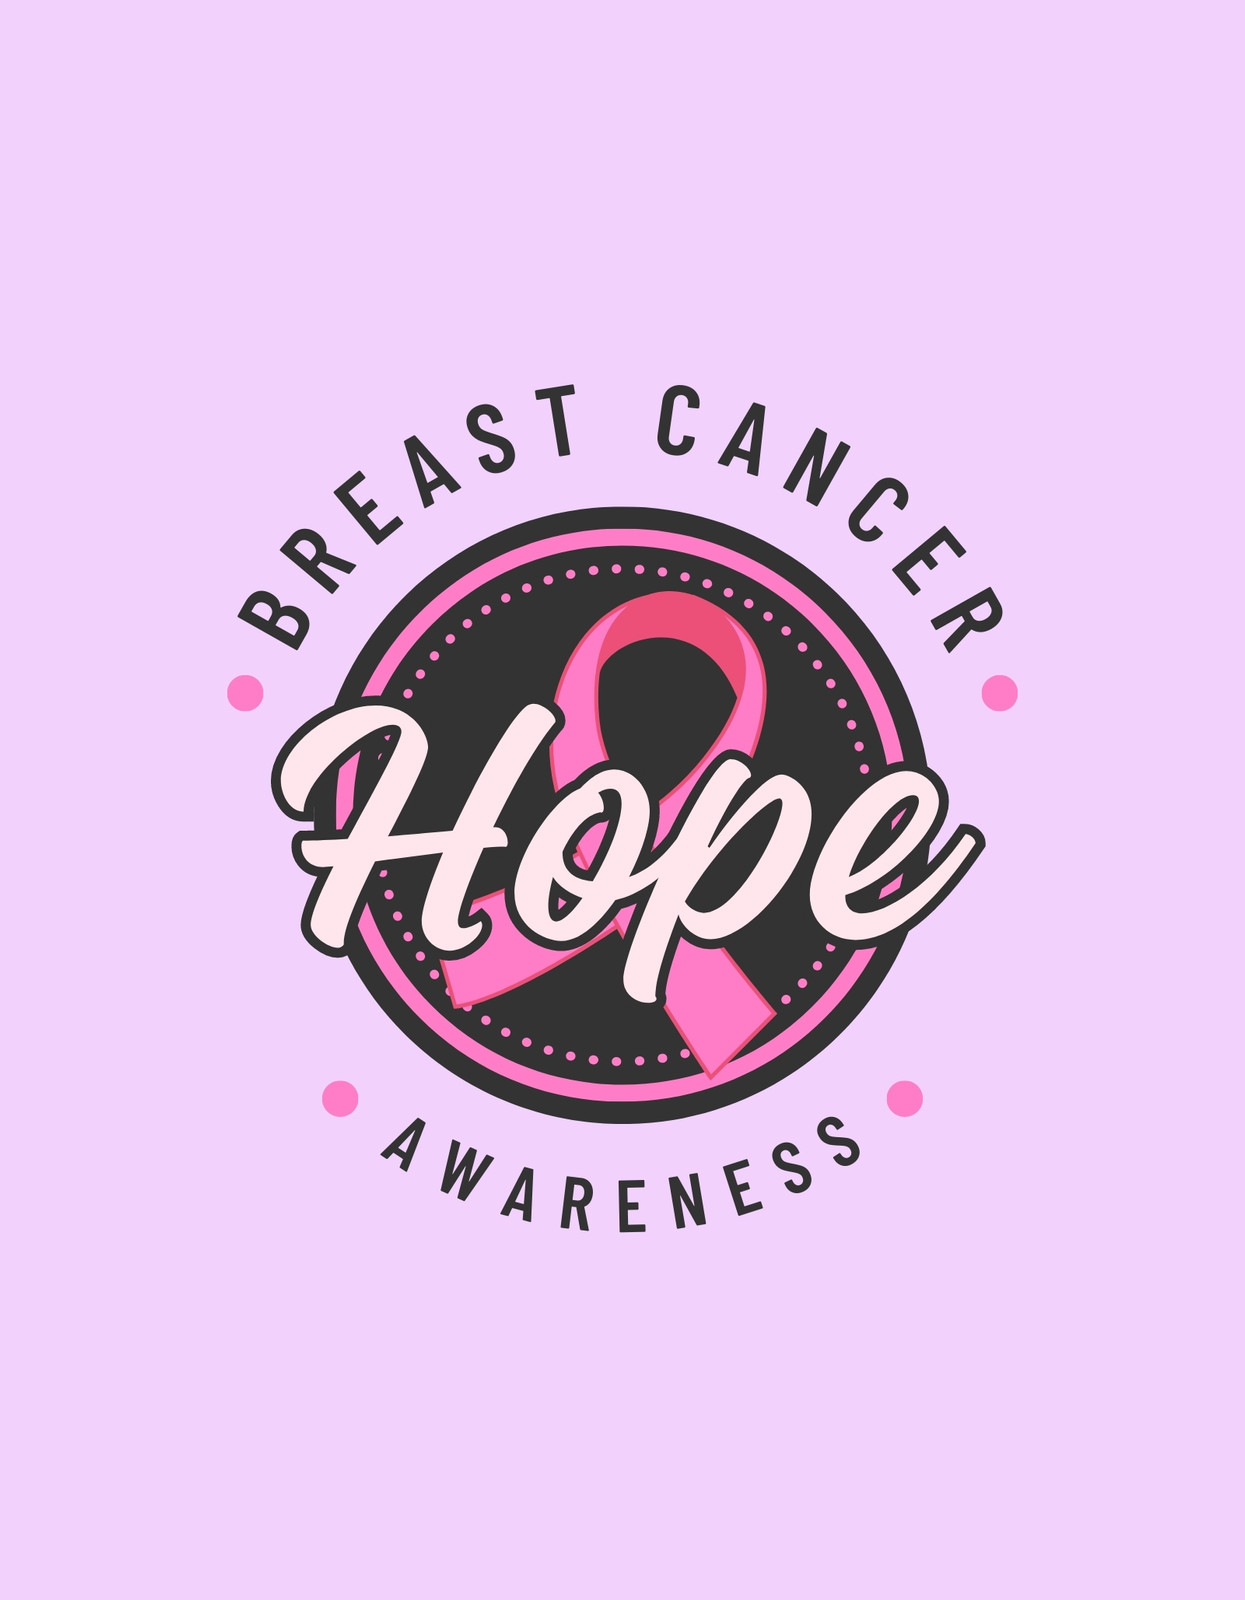 fight cancer logos